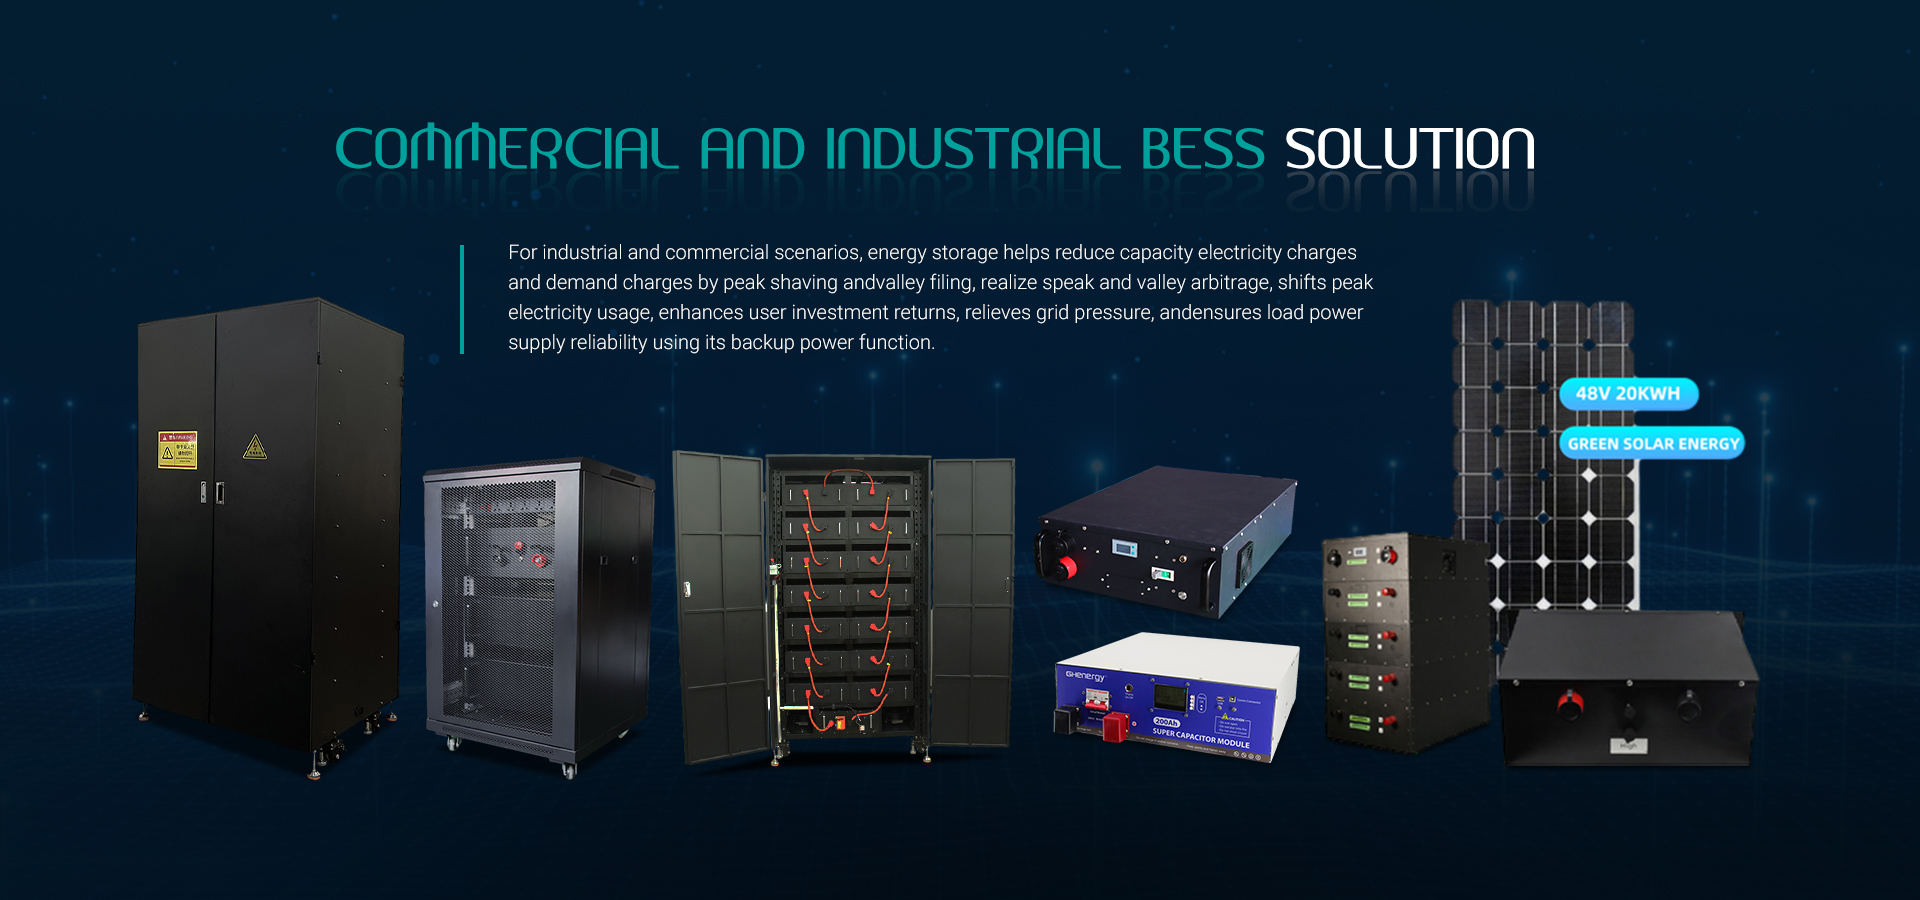 COMMERCIAL AND INDUSTRIAL BESS SOU UTION 